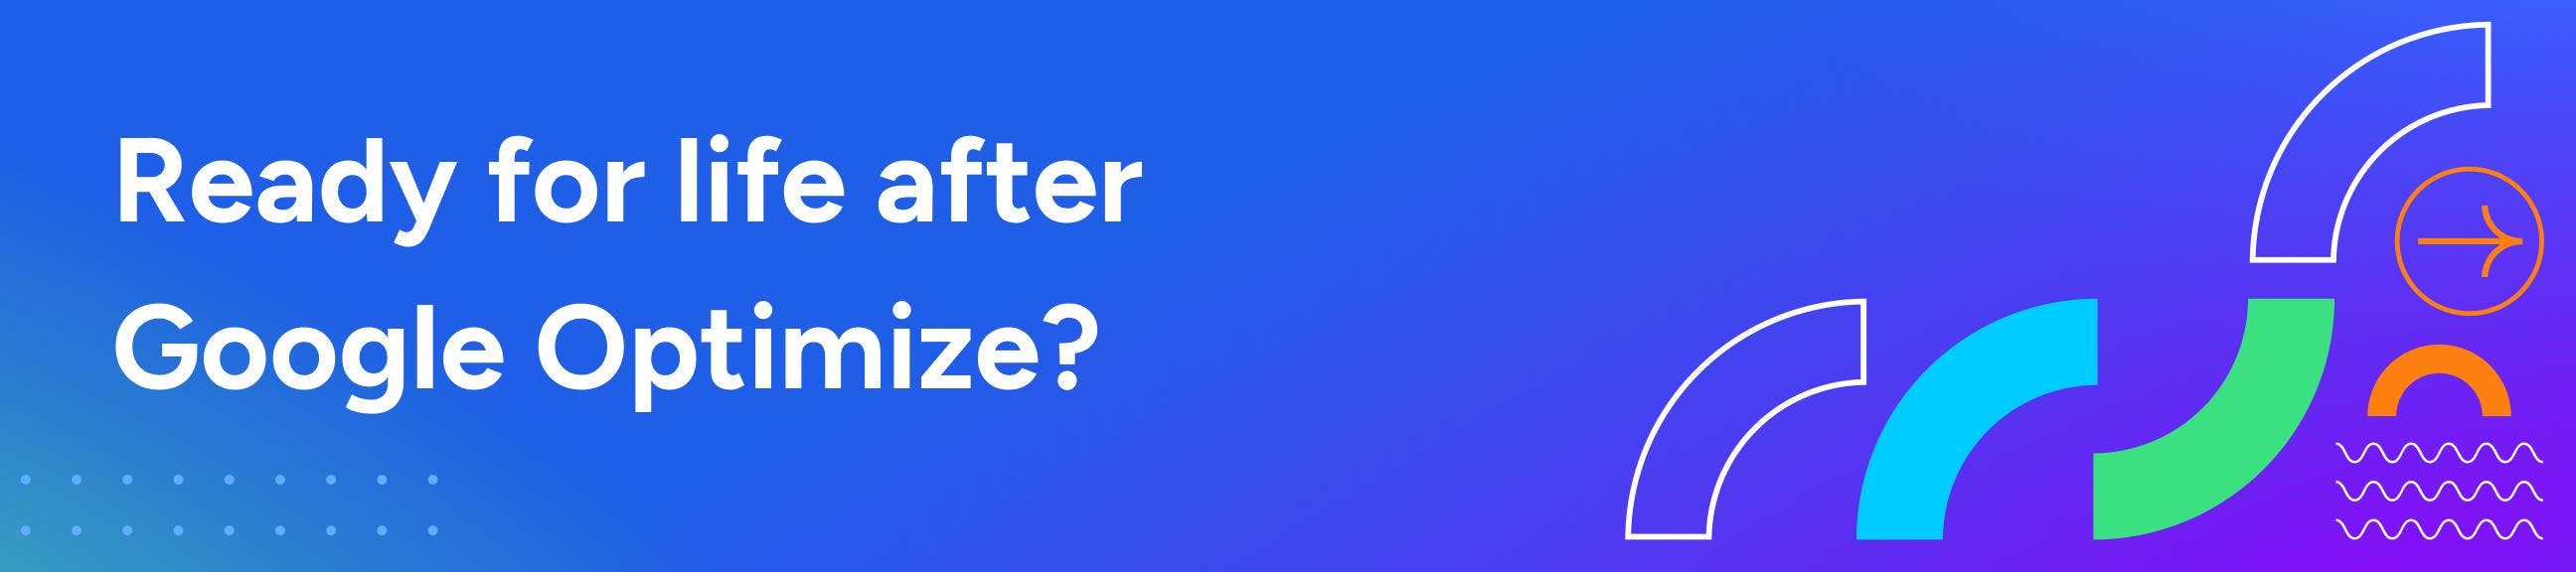 Ready for life after Google Optimize?